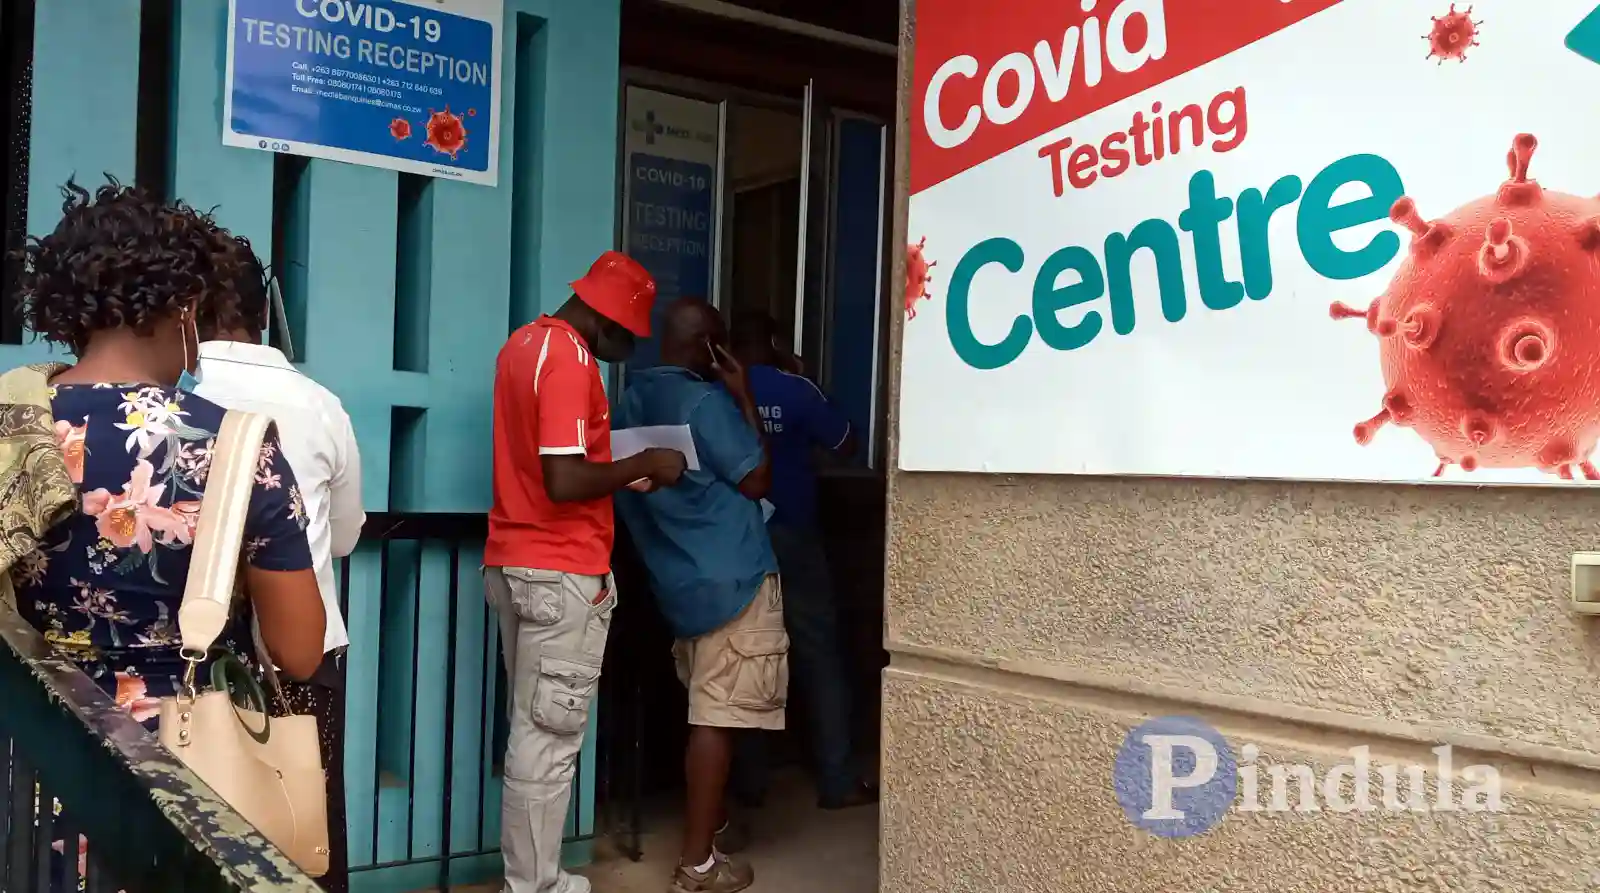 Brace For More COVID-19 Deaths In The Coming Weeks - Health Experts